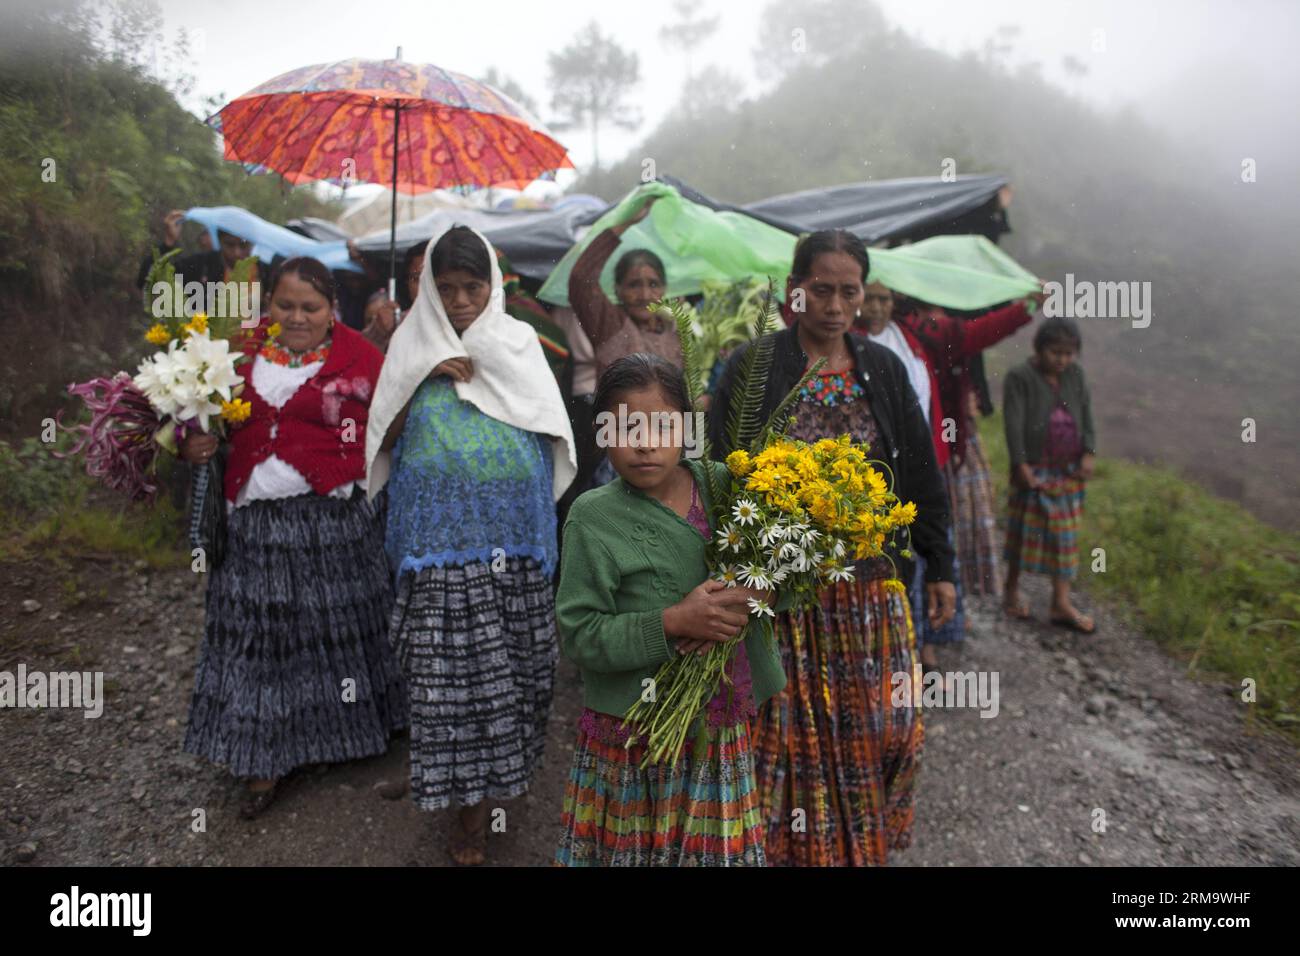 (140603) -- SANTA CRUZ VERAPAZ, June 3, 2014 (Xinhua) -- People participate in a funeral of six villagers 32 years after they vanished, at Pambach village, at Santa Cruz Verapaz township, in Alta Verapaz department, Guatemala, on June 2, 2014. On June 2, 1982, Guatemala s Army soldiers arrived at Pambach village, where 82 people vanished. Guatemala s Forensic Anthropology Foundation (FAFG, for its acronym in spanish), identified remains from six of them, found near United Nations Regional Center of Peacekeeping Operations Training, an old military base in Alta Verapaz department, and delivered Stock Photo